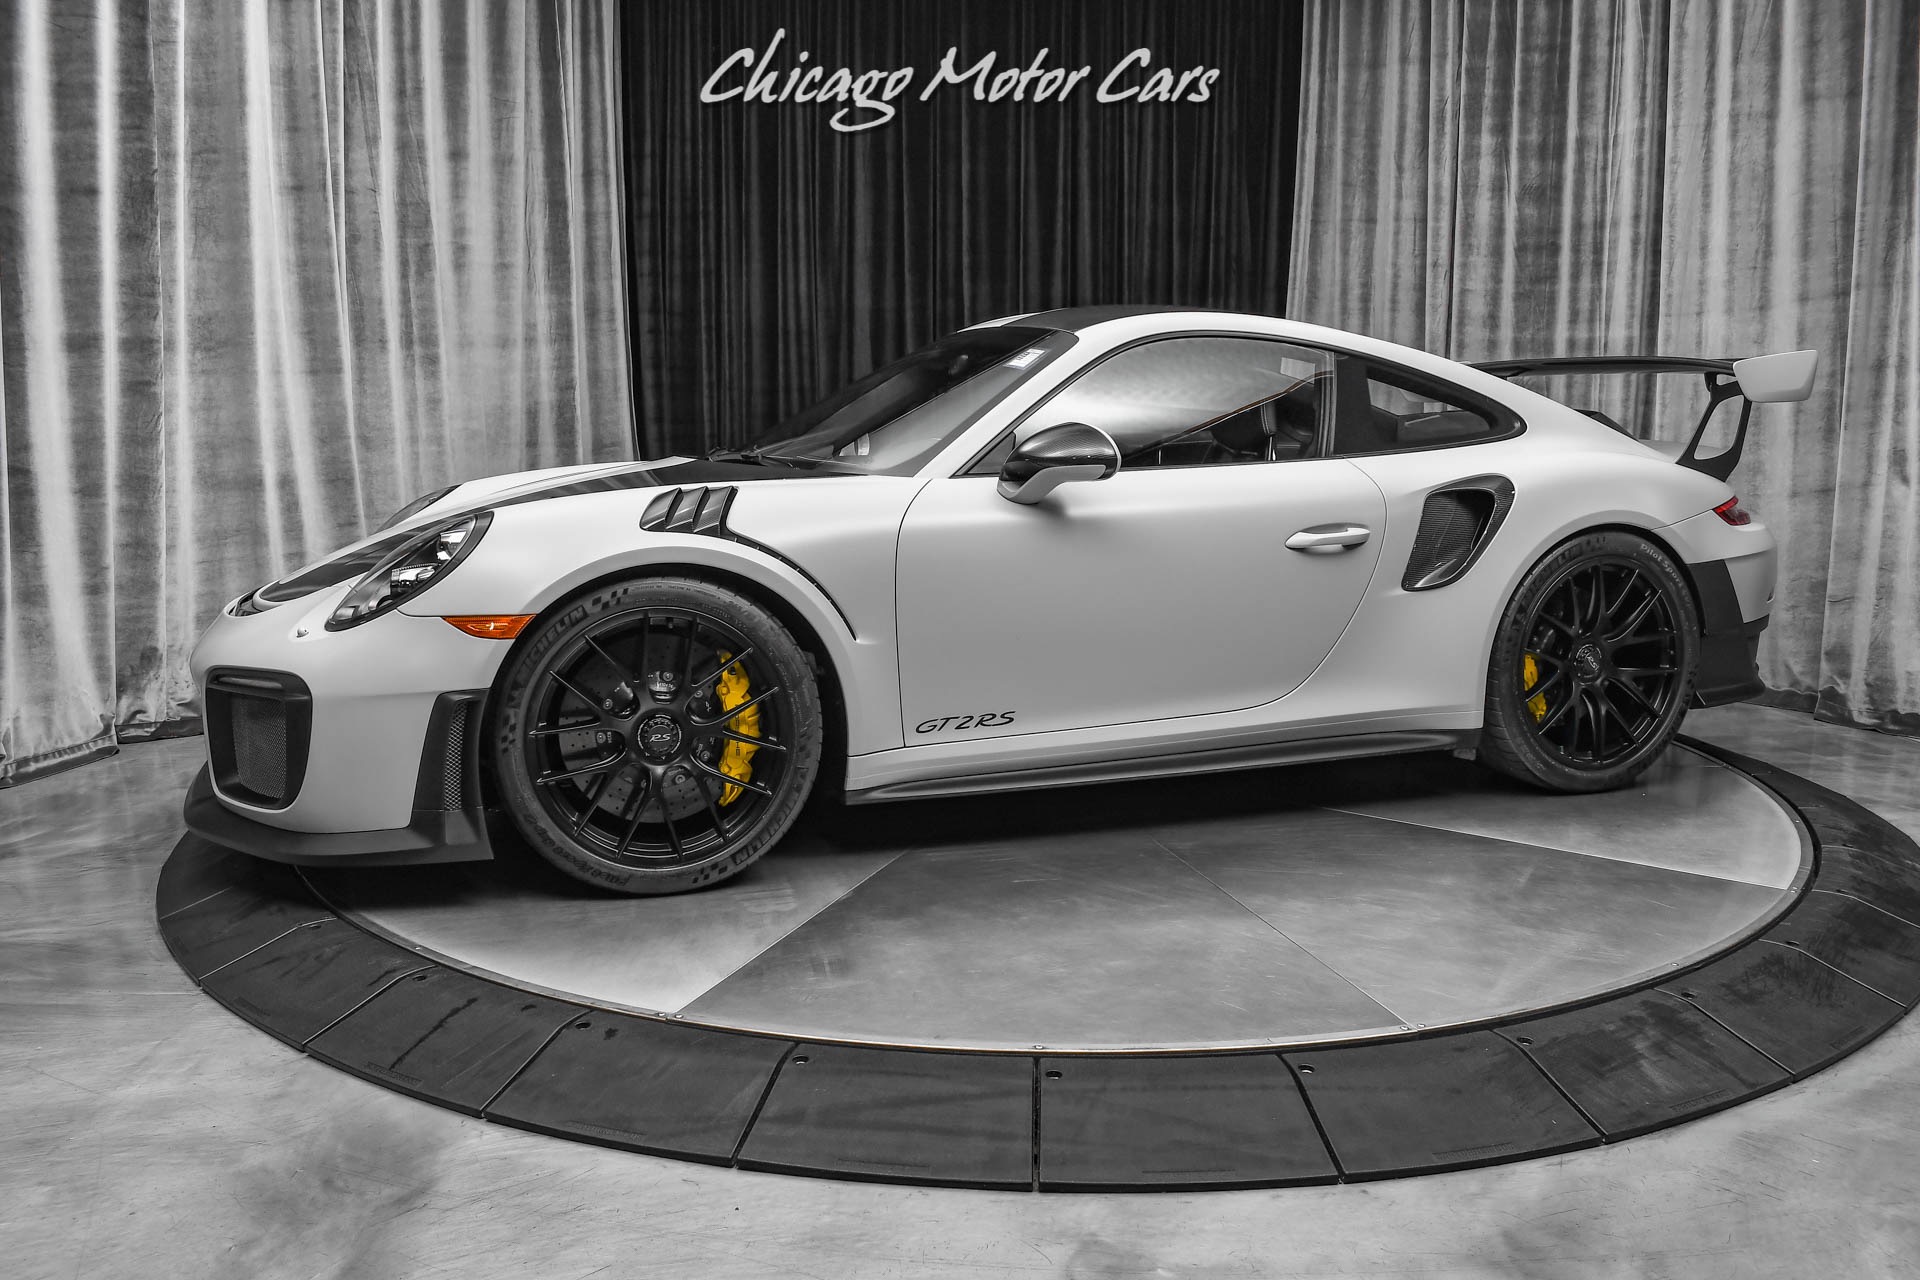 Used 2018 Porsche 911 GT2 RS Coupe Weissach Package! Magnesium Wheels!  Front Axle Lift! 721 Miles For Sale (Sold)